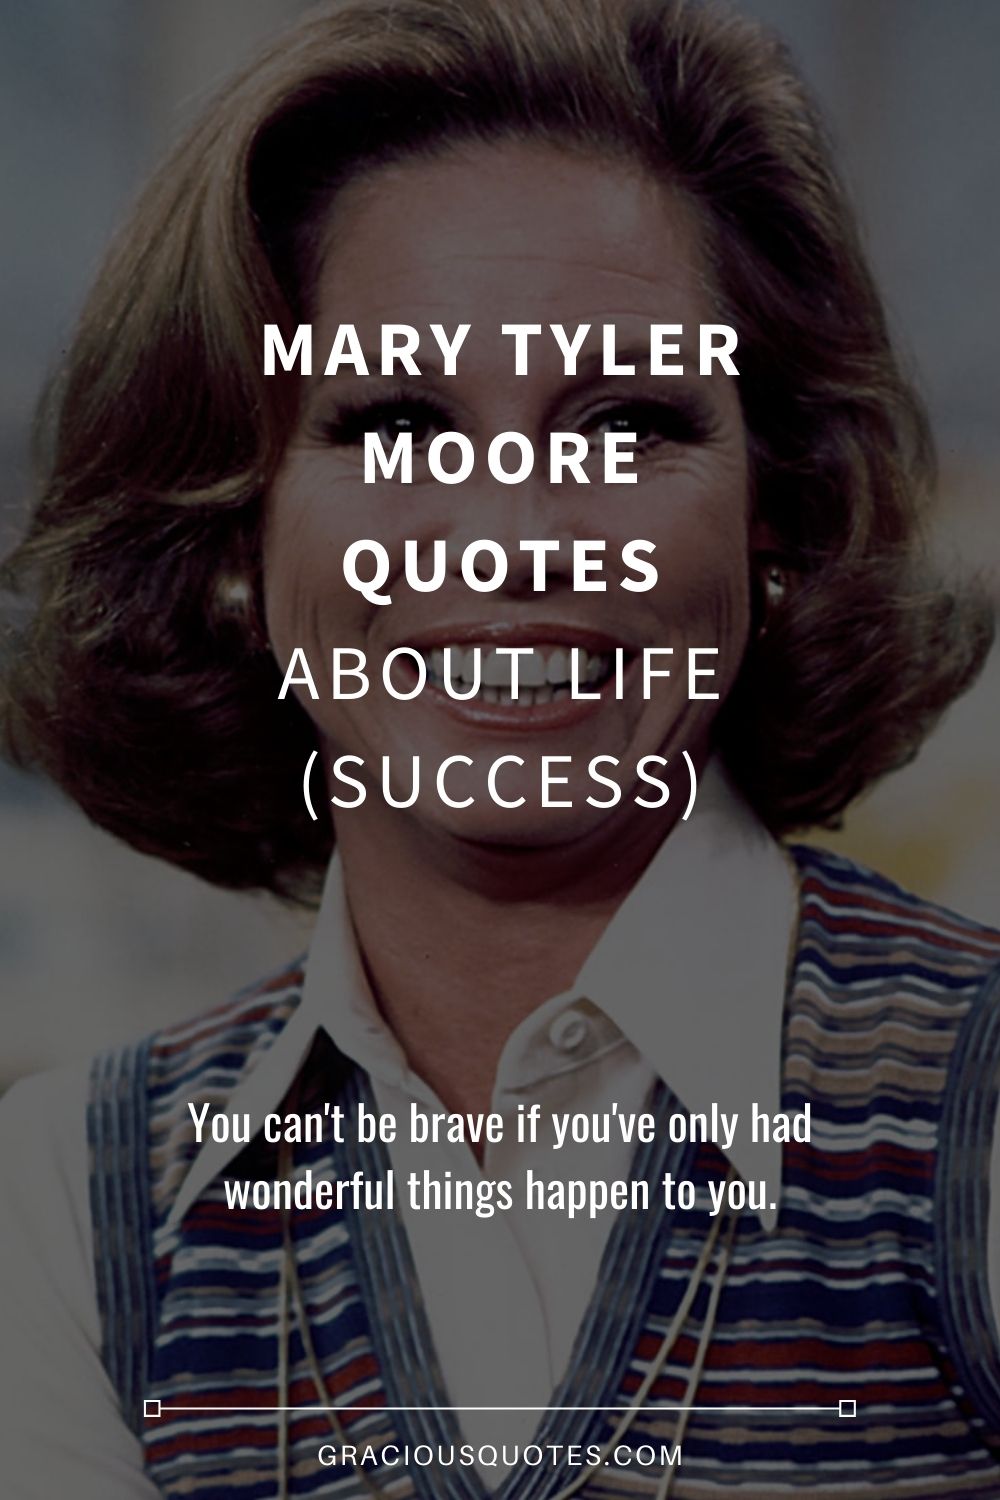 Mary Tyler Moore Quotes About Life (SUCCESS) - Gracious Quotes